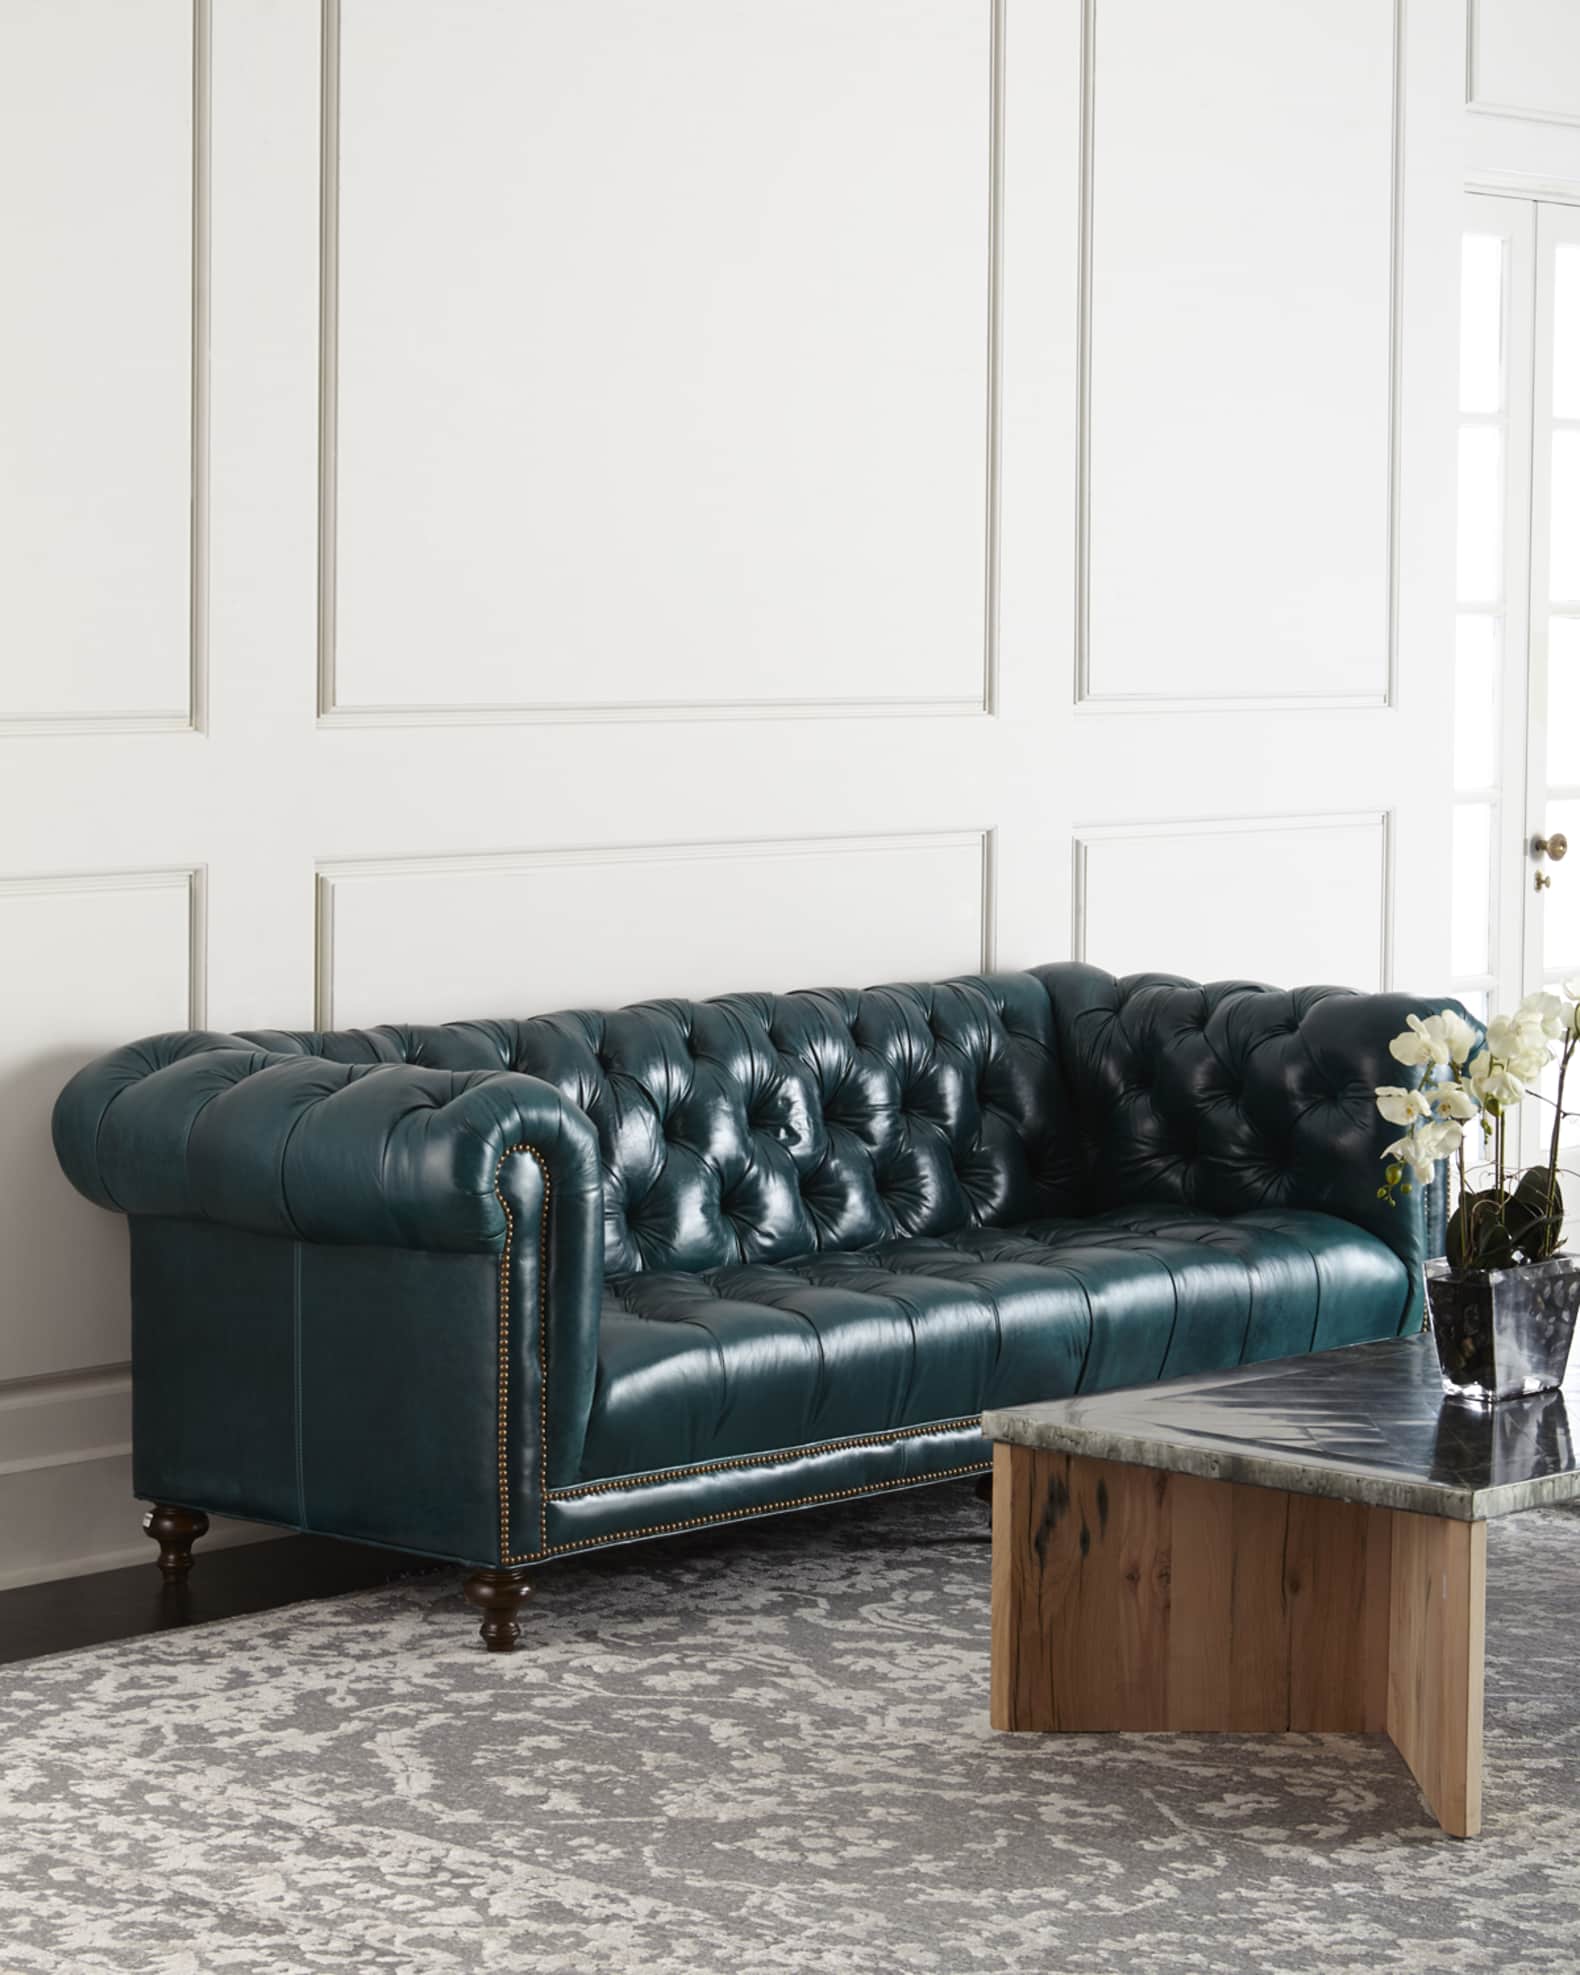 94 Tufted Seat Chesterfield Sofa Horchow